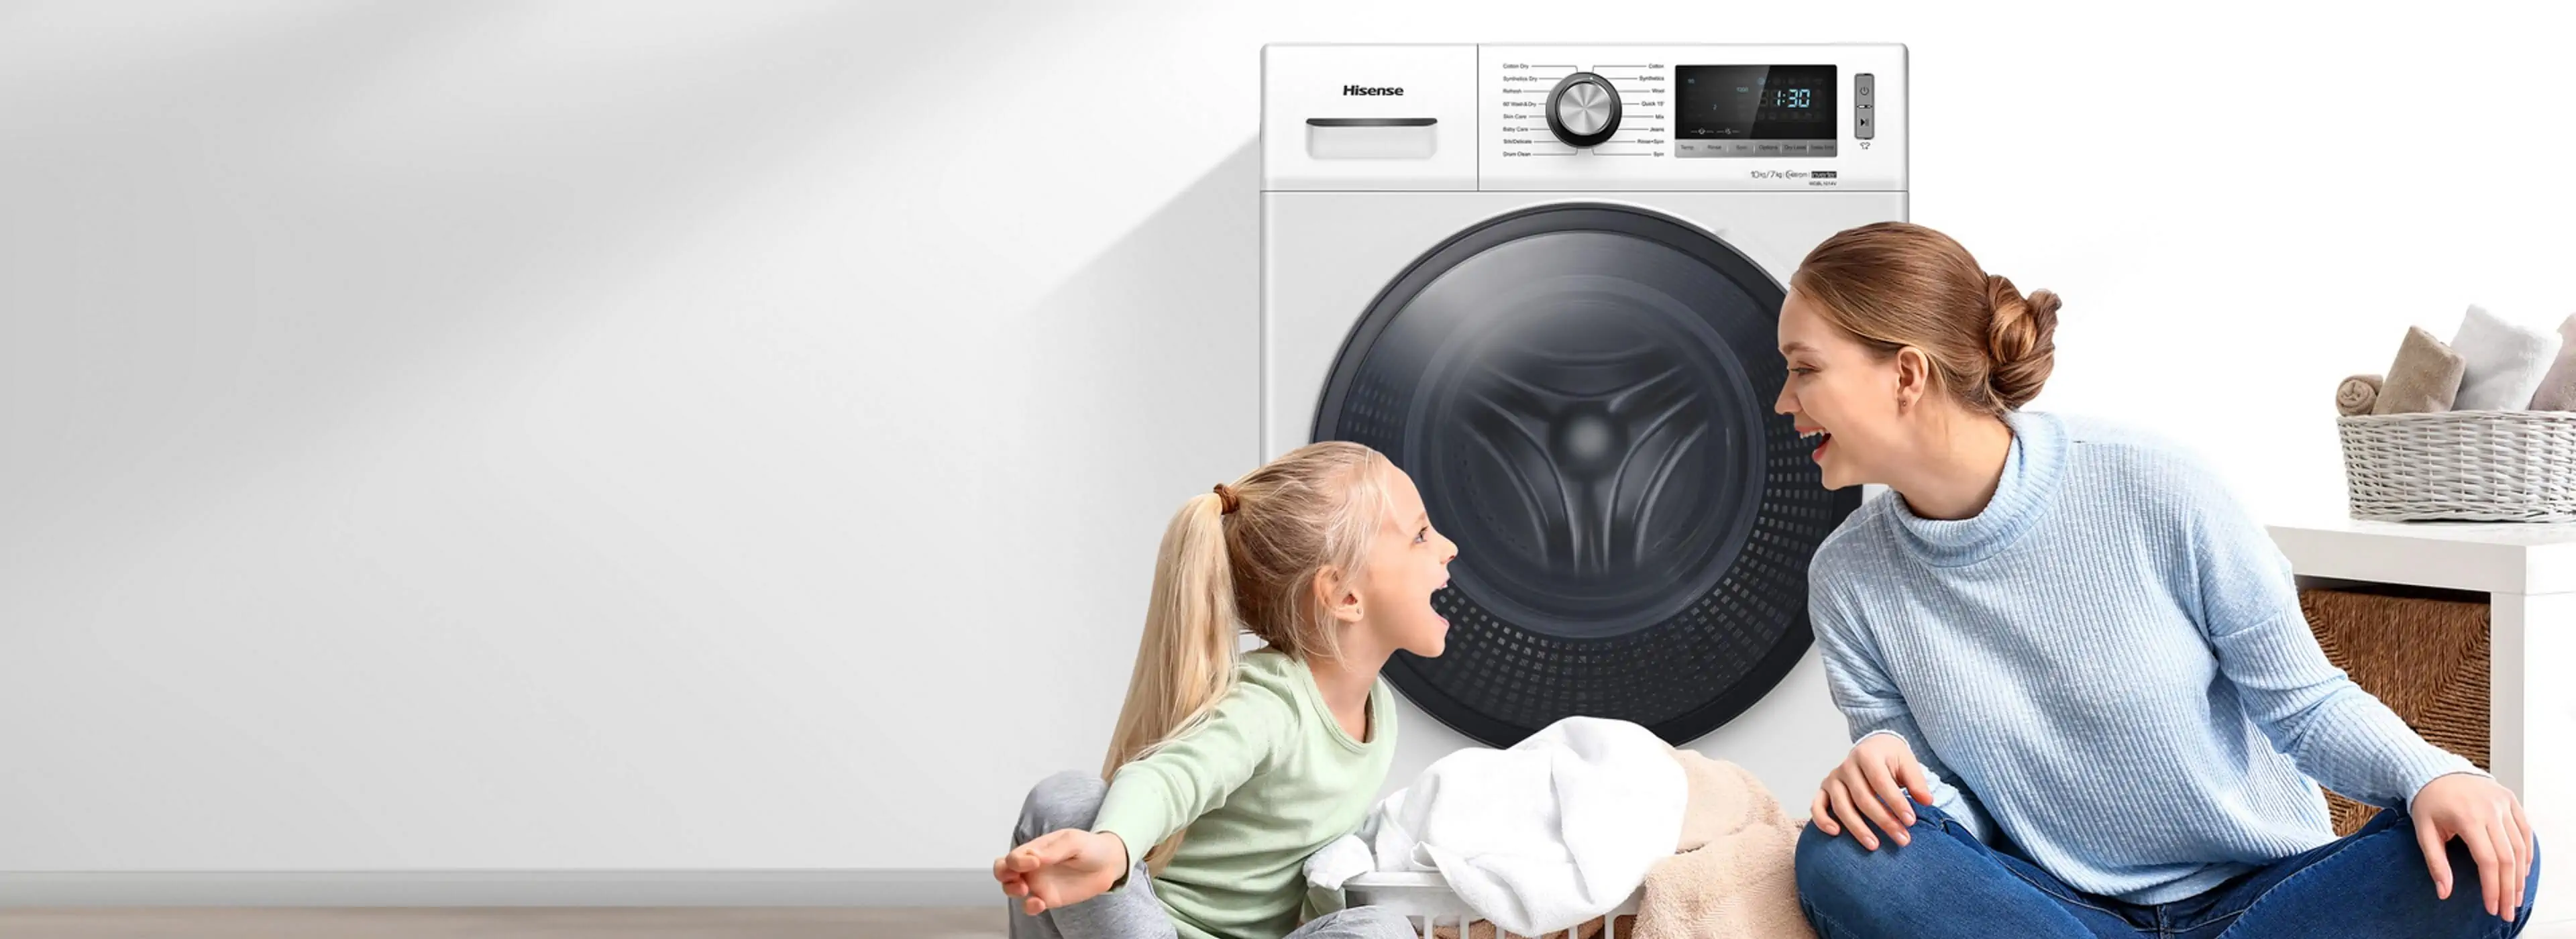 RS-Hisense-Washing-Category-banner-3840x1400-compressed.webp